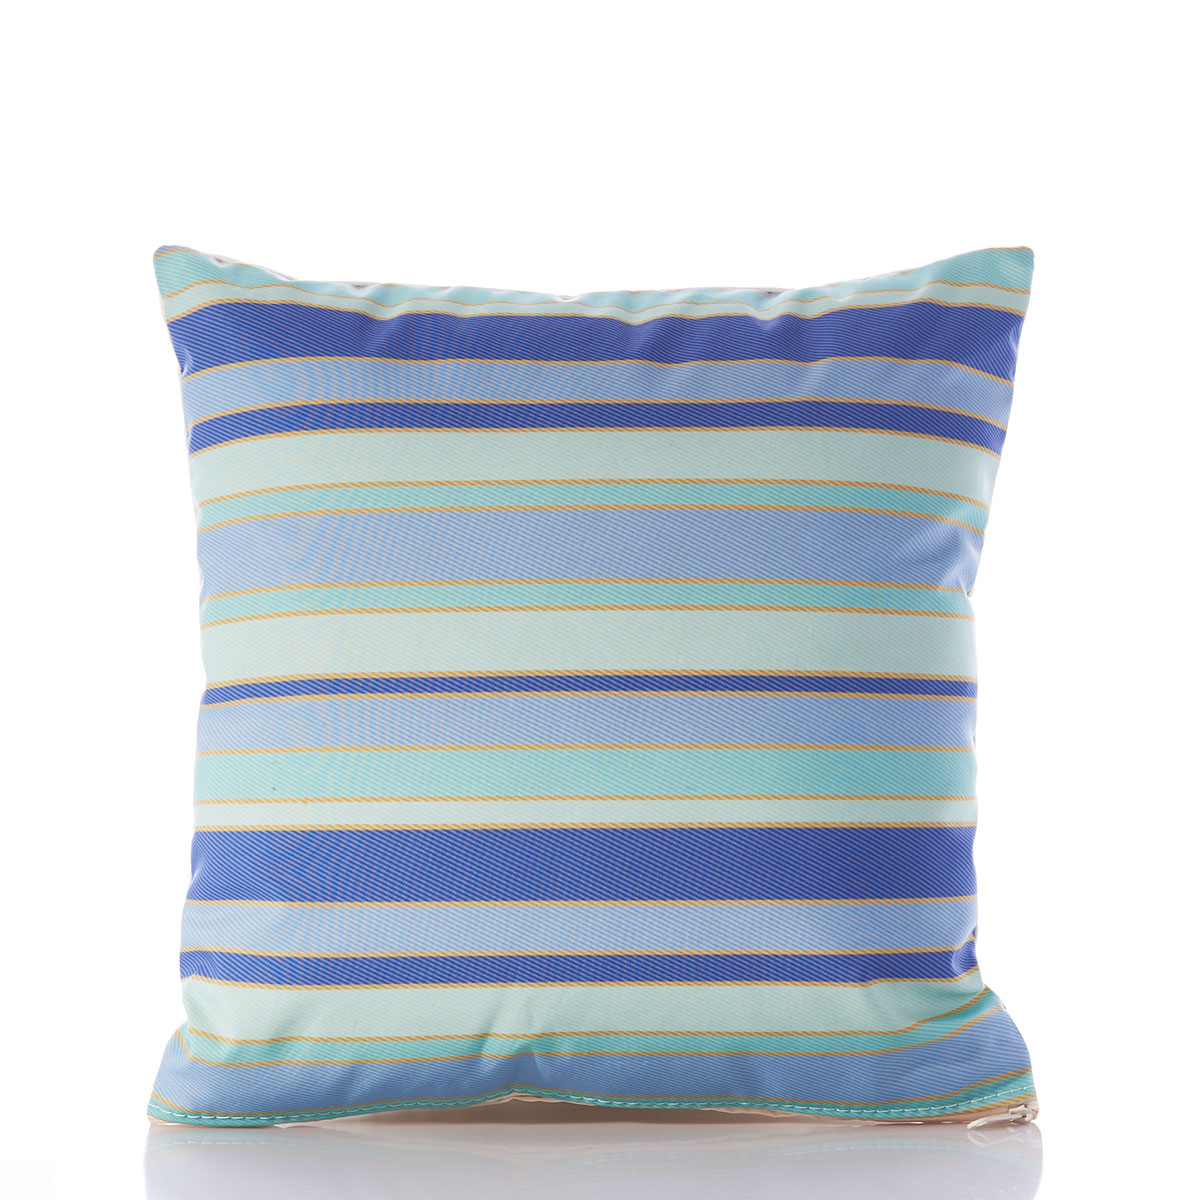 stripes of shades of blues are printed on this recycled sail cloth pillow